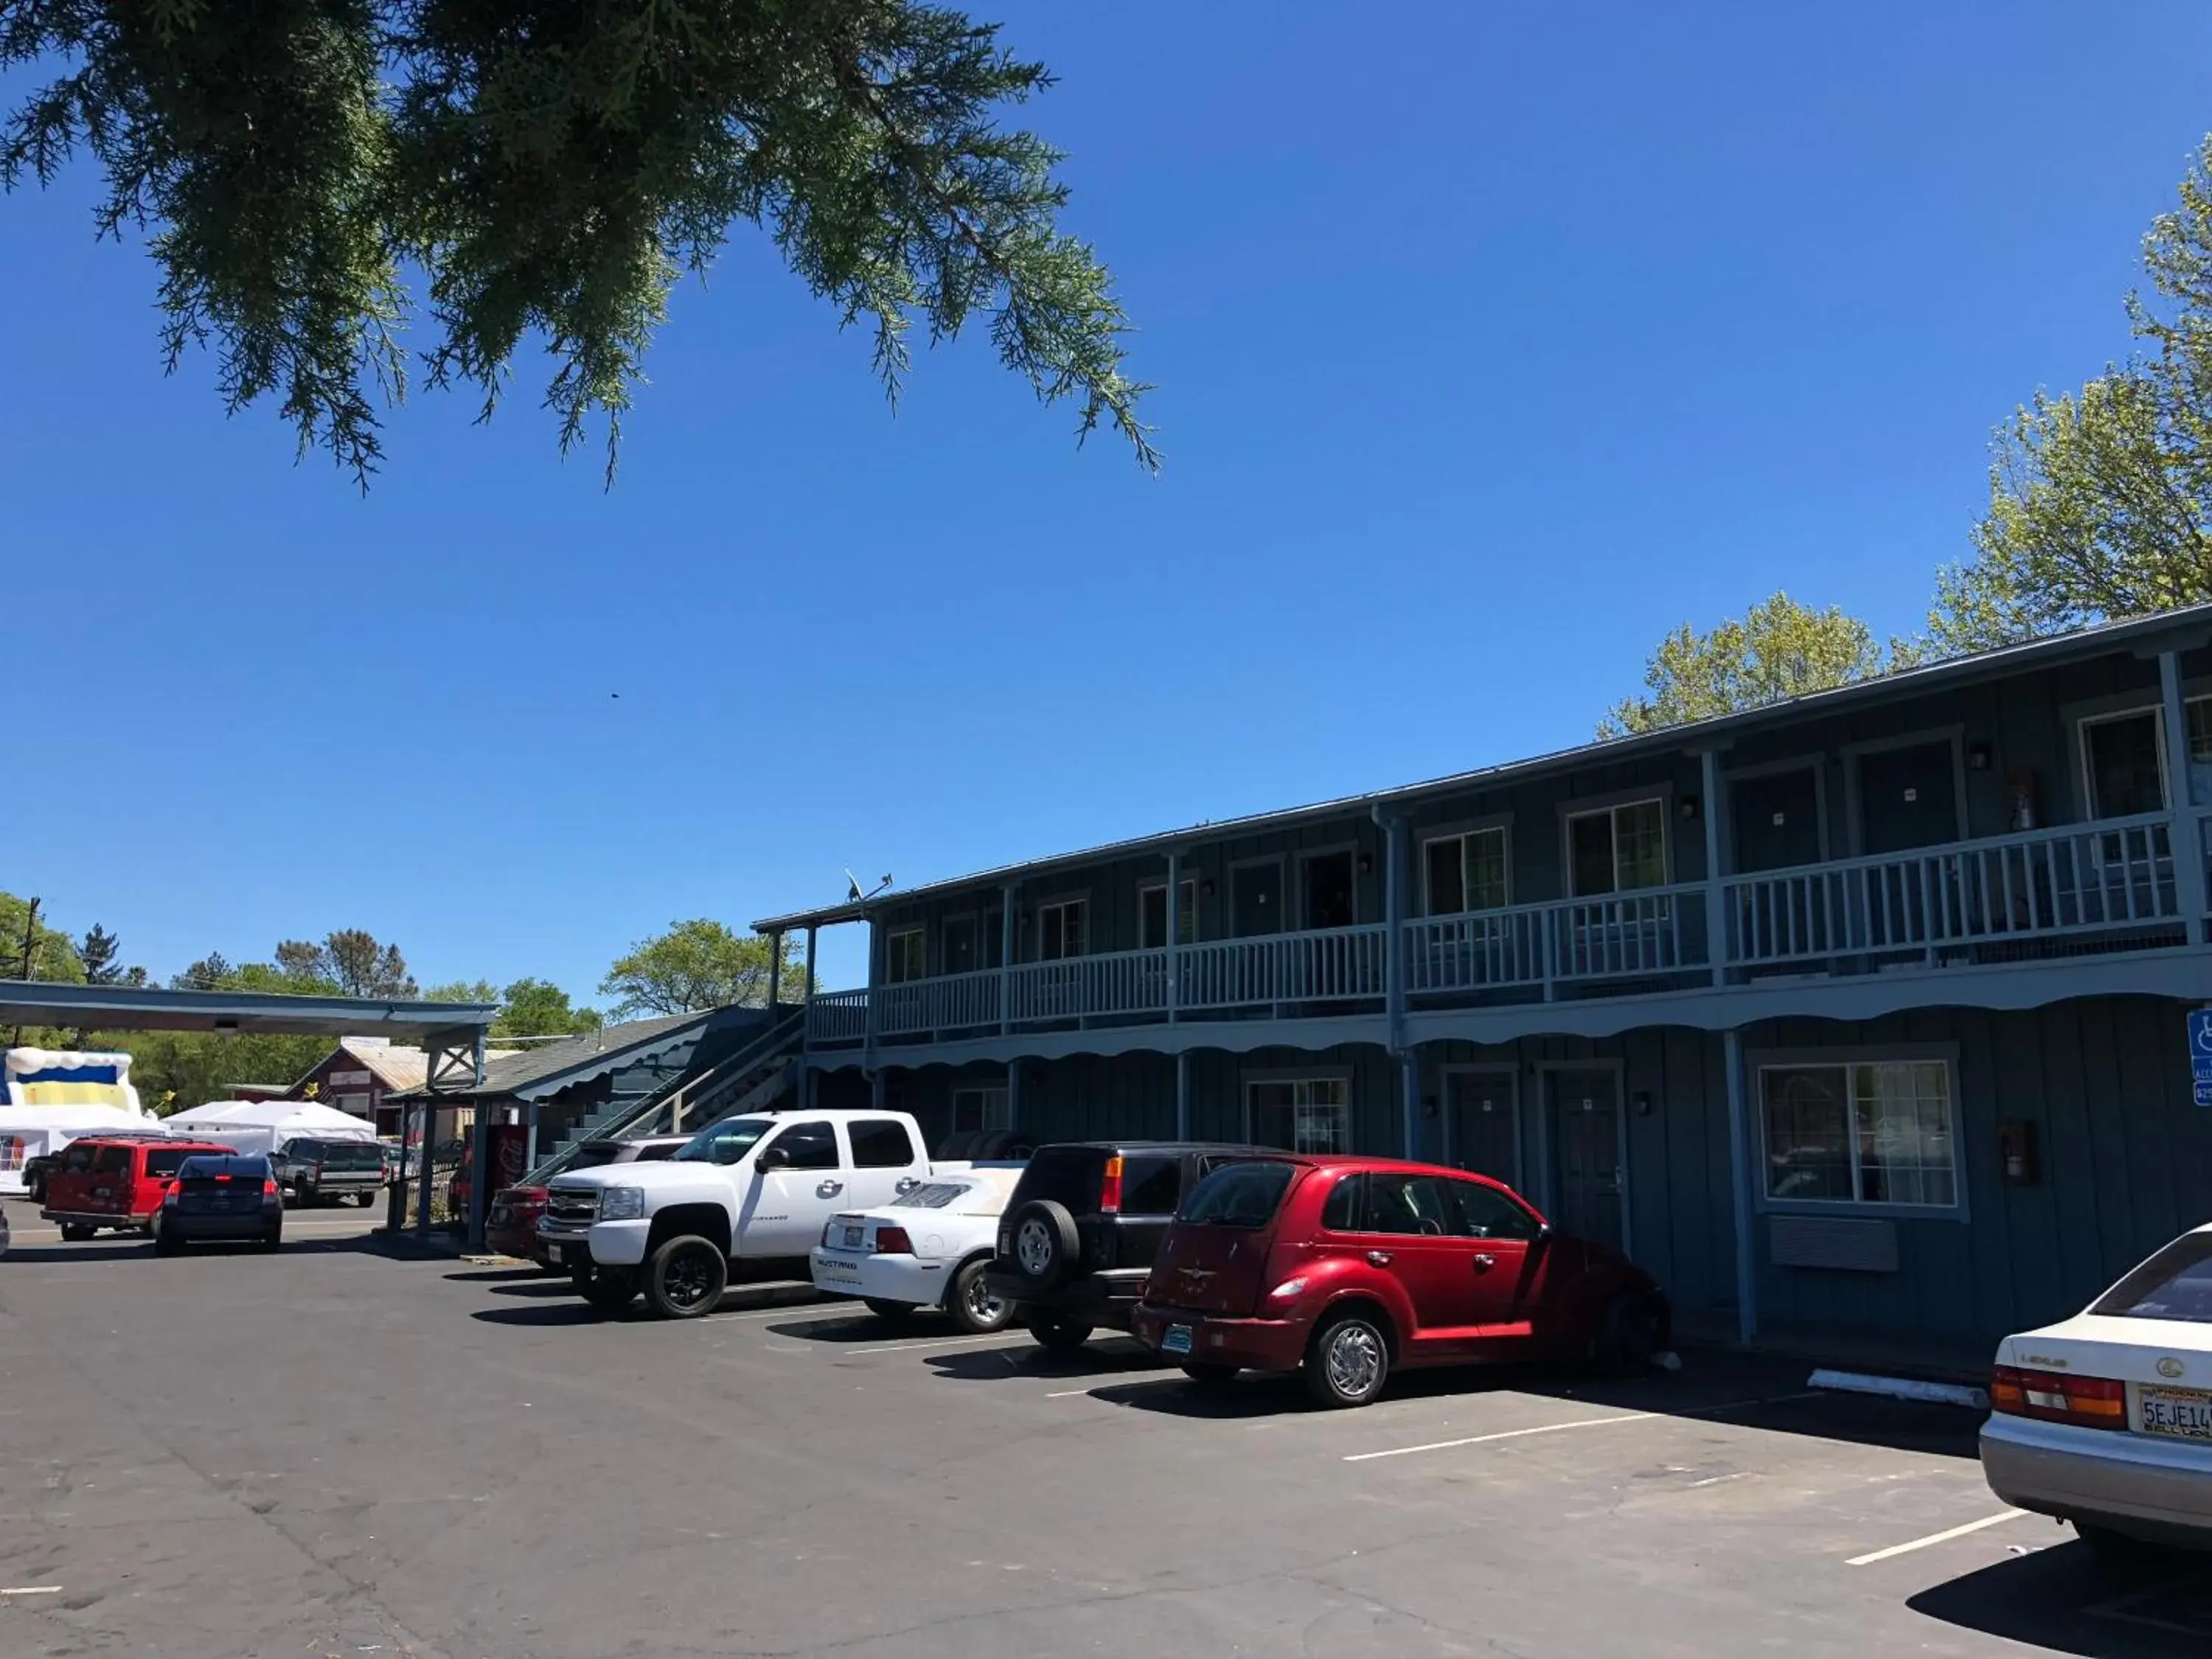 Property Building in Lamplighter Motel Clearlake